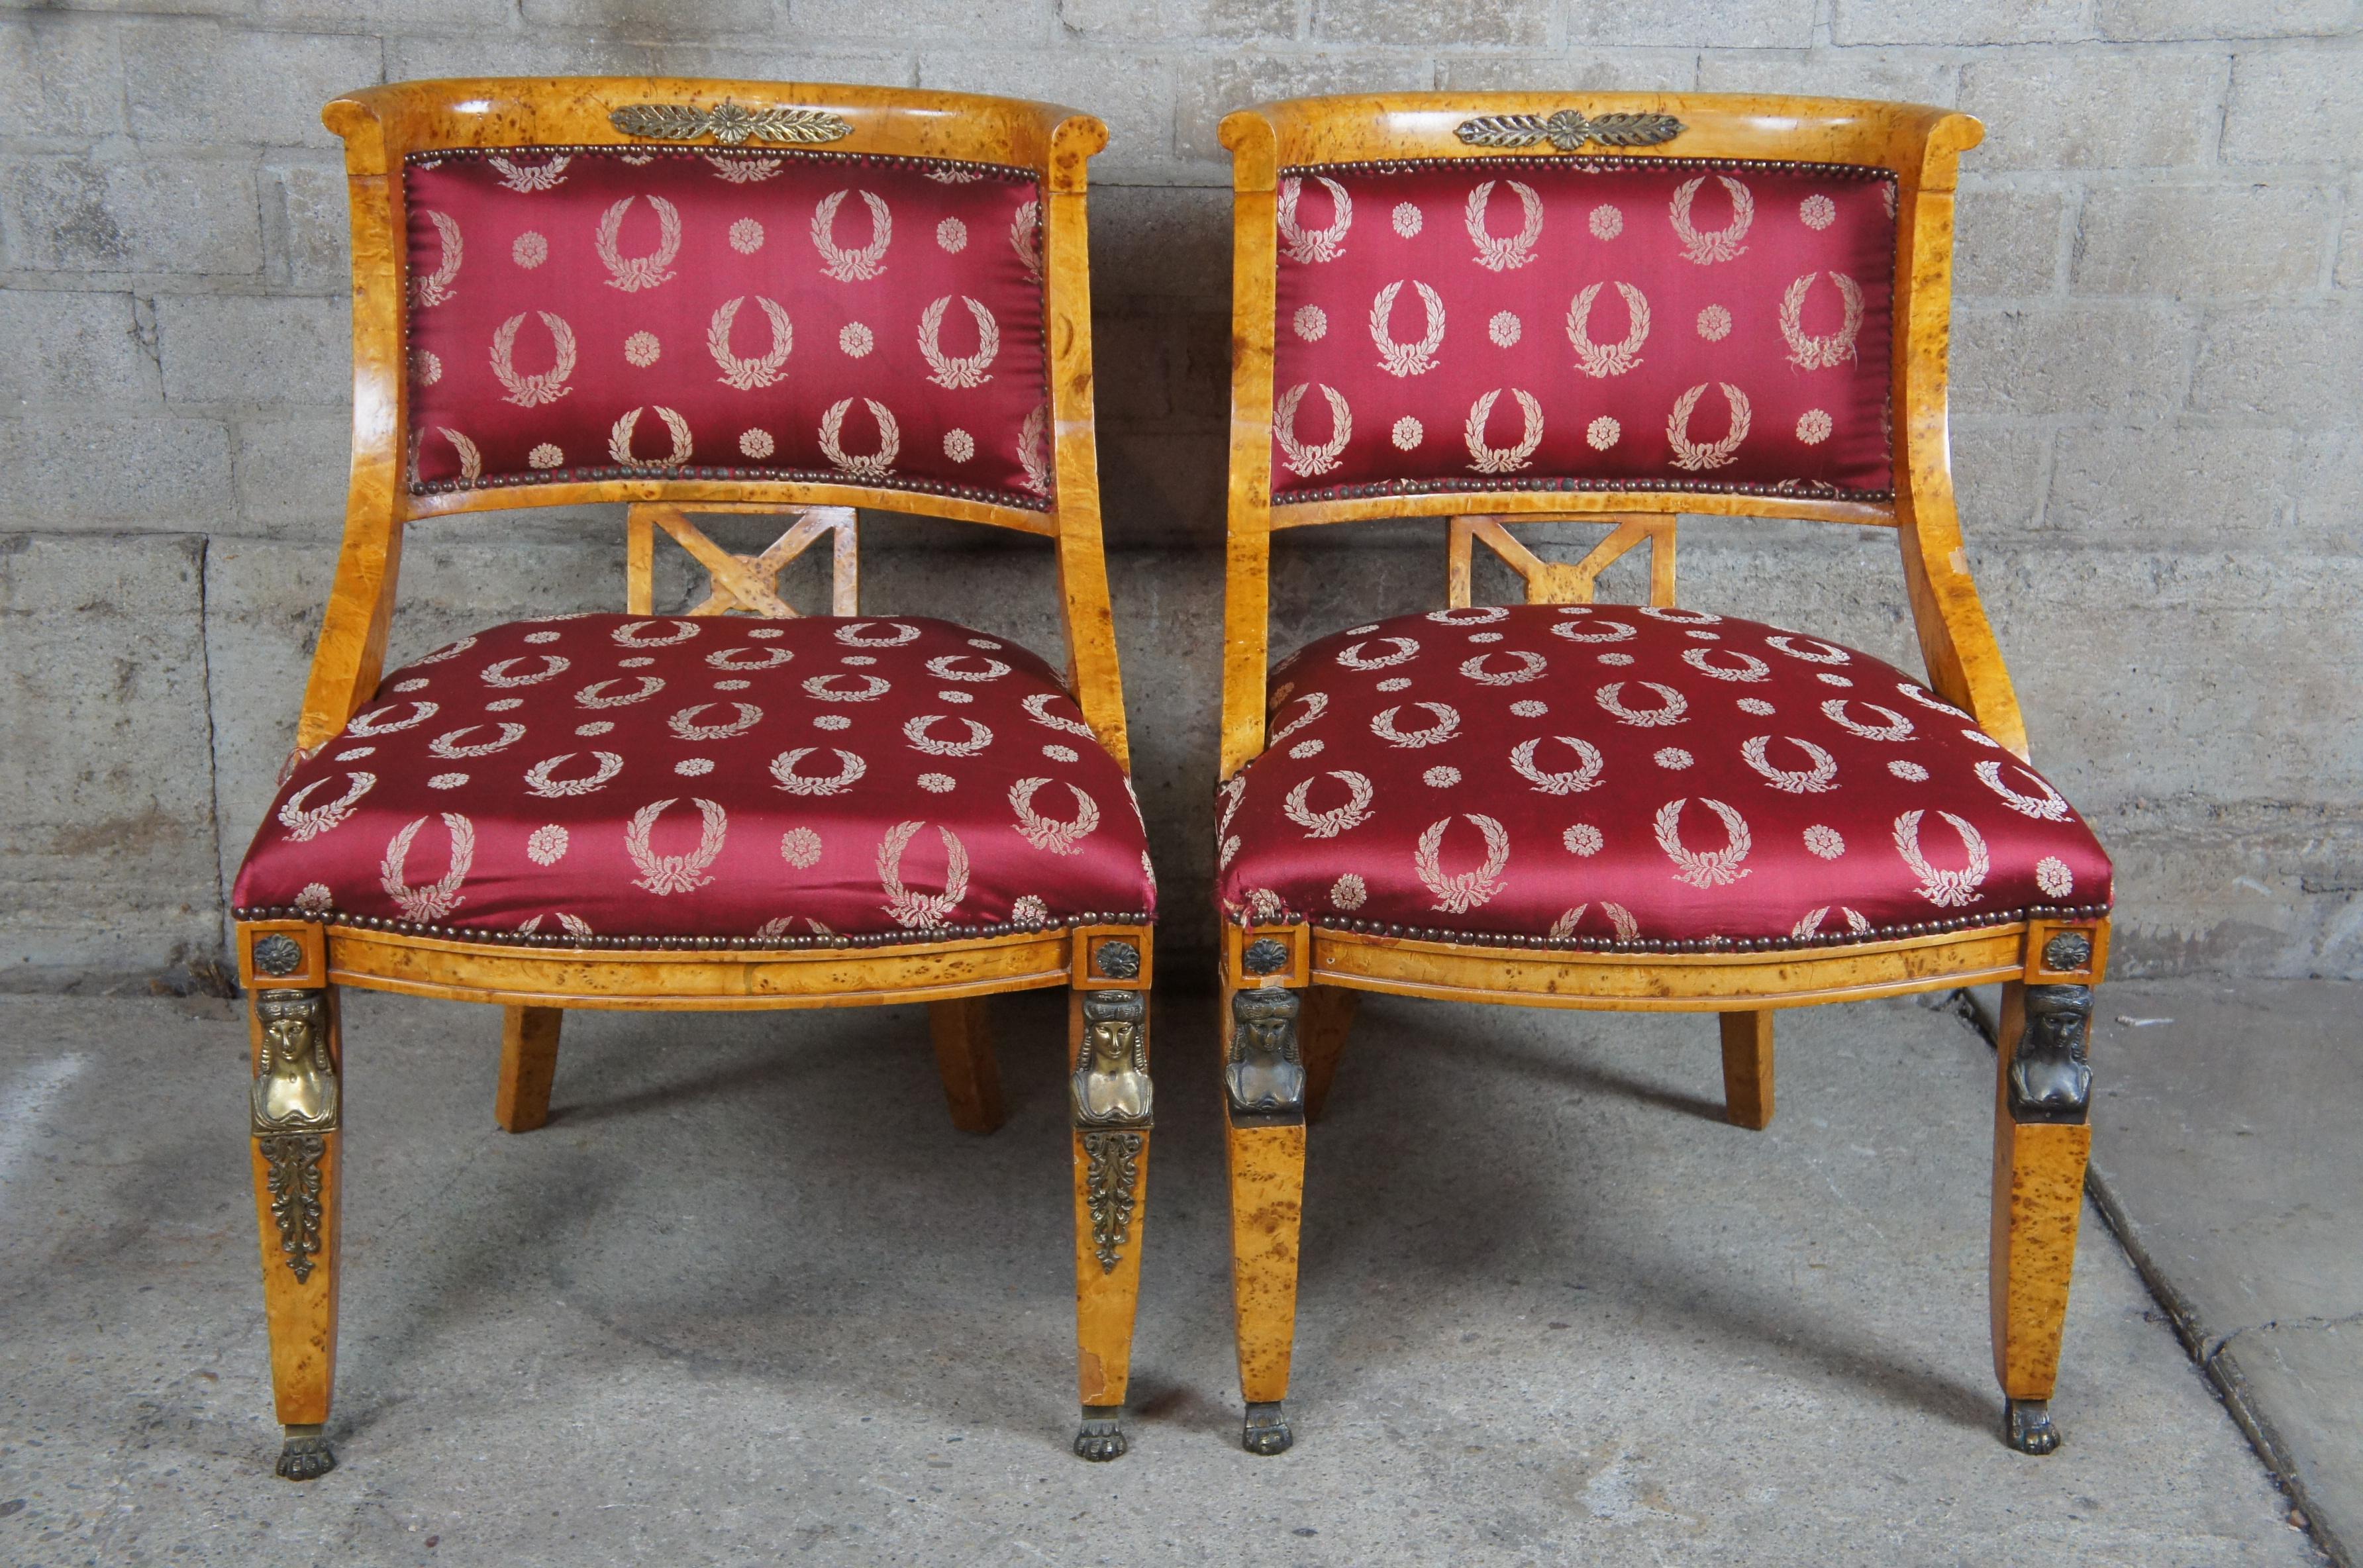 Egyptian Revival Antique Revival Olive Burlwood Parlor Set of 4 Chairs Settee Neoclassical